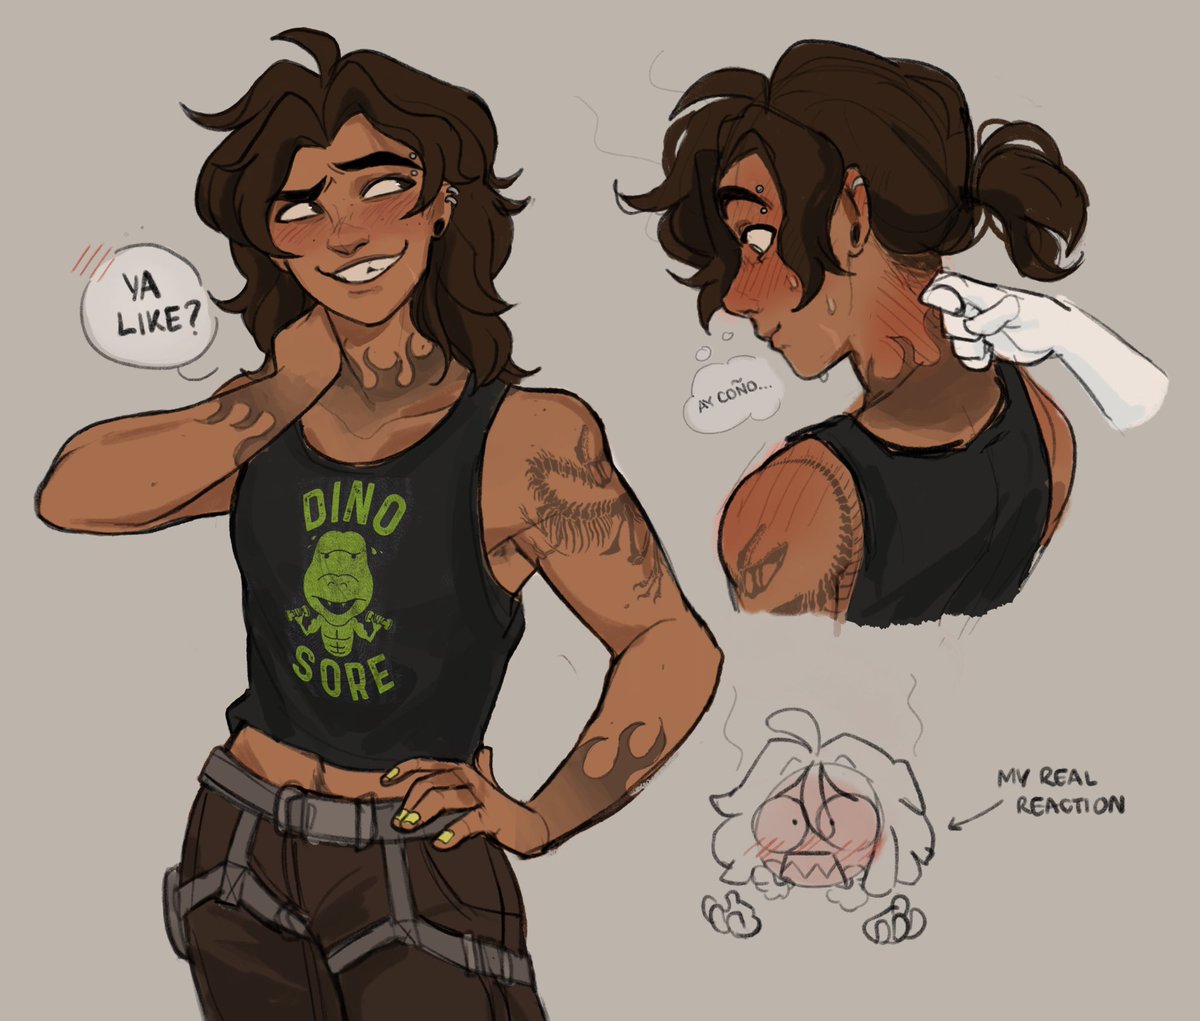 @ElvisBadger’s new haircut gave me ideas,,
Also Sloan canonically owns that shirt because I said so- #Venture #Overwatch2